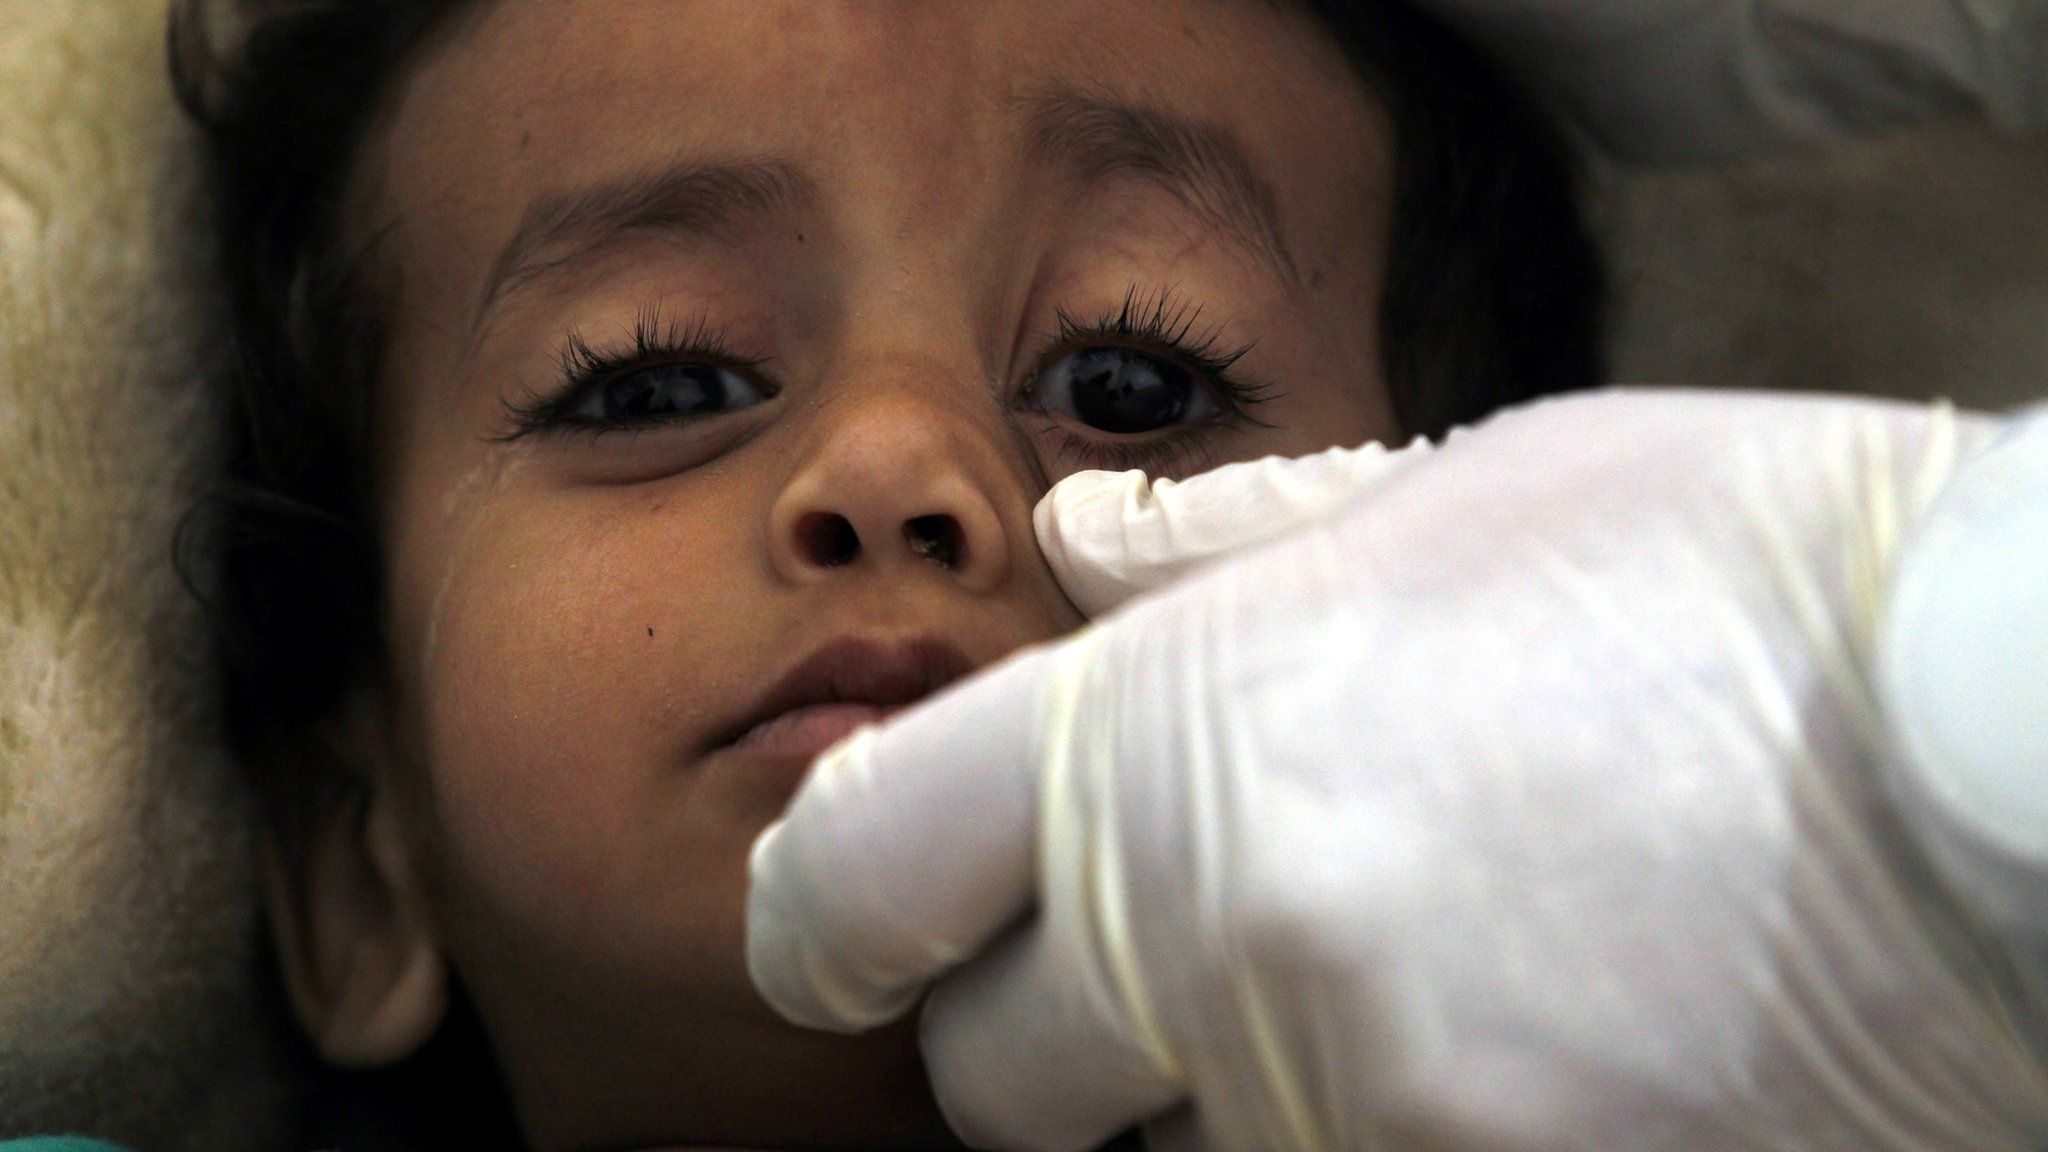 A cholera-infected Yemeni child receives treatment at a hospital amid a serious outbreak in Sanaa, Yemen (4 June 2017)